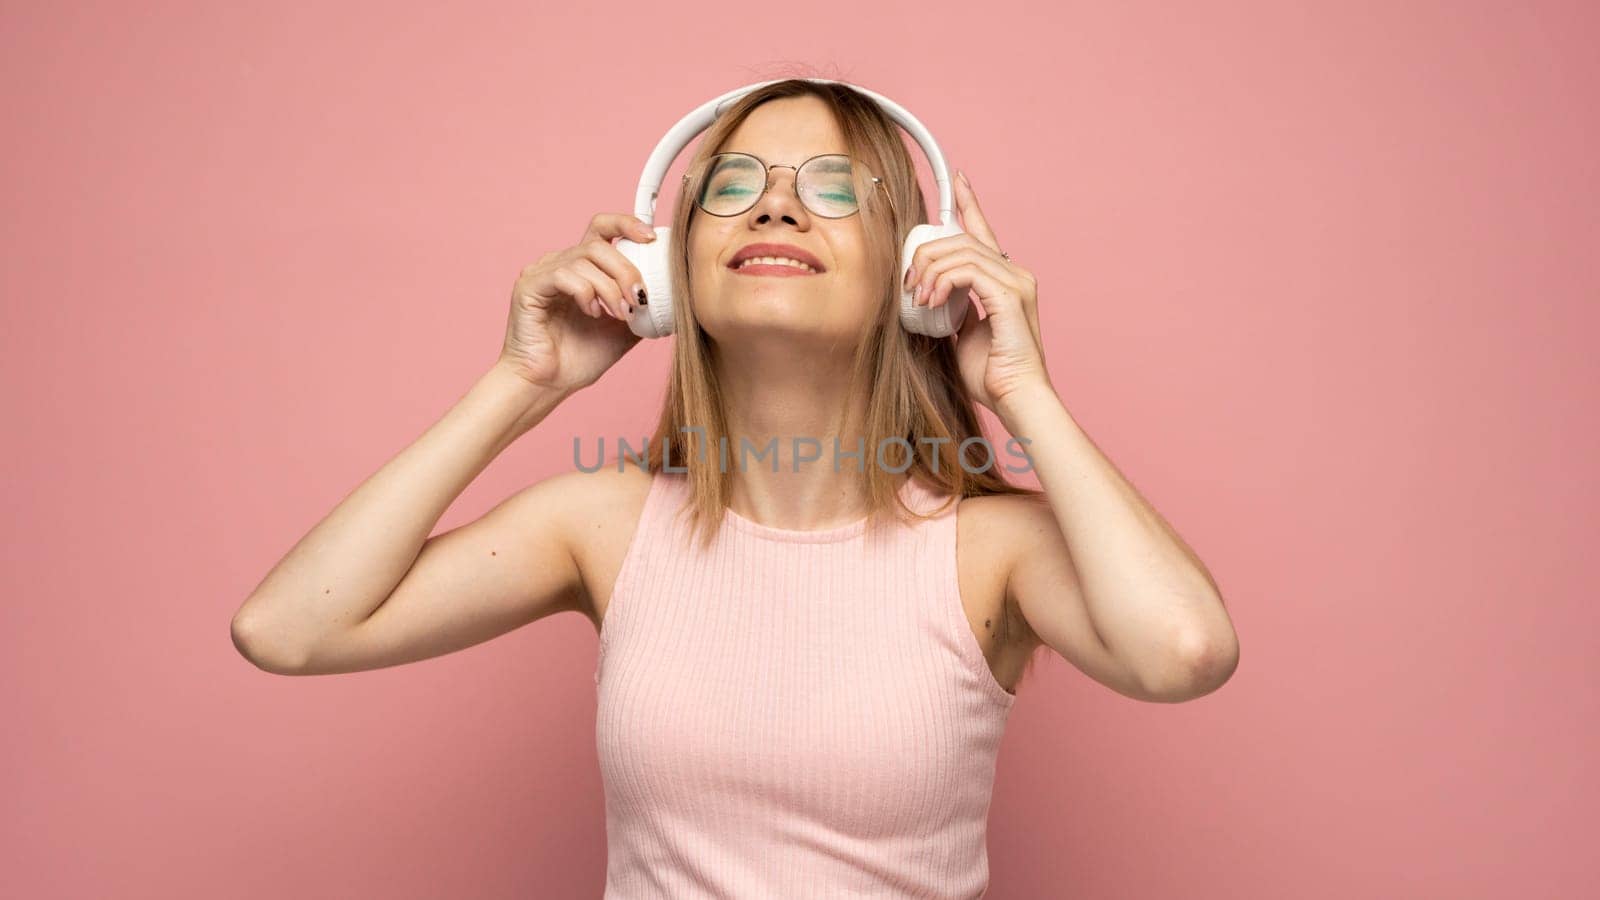 Beautiful attractive young blond woman wearing pink t-shirt and glasses in white headphones listening music and smiling on pink background in studio. Relaxing and enjoying. Lifestyle